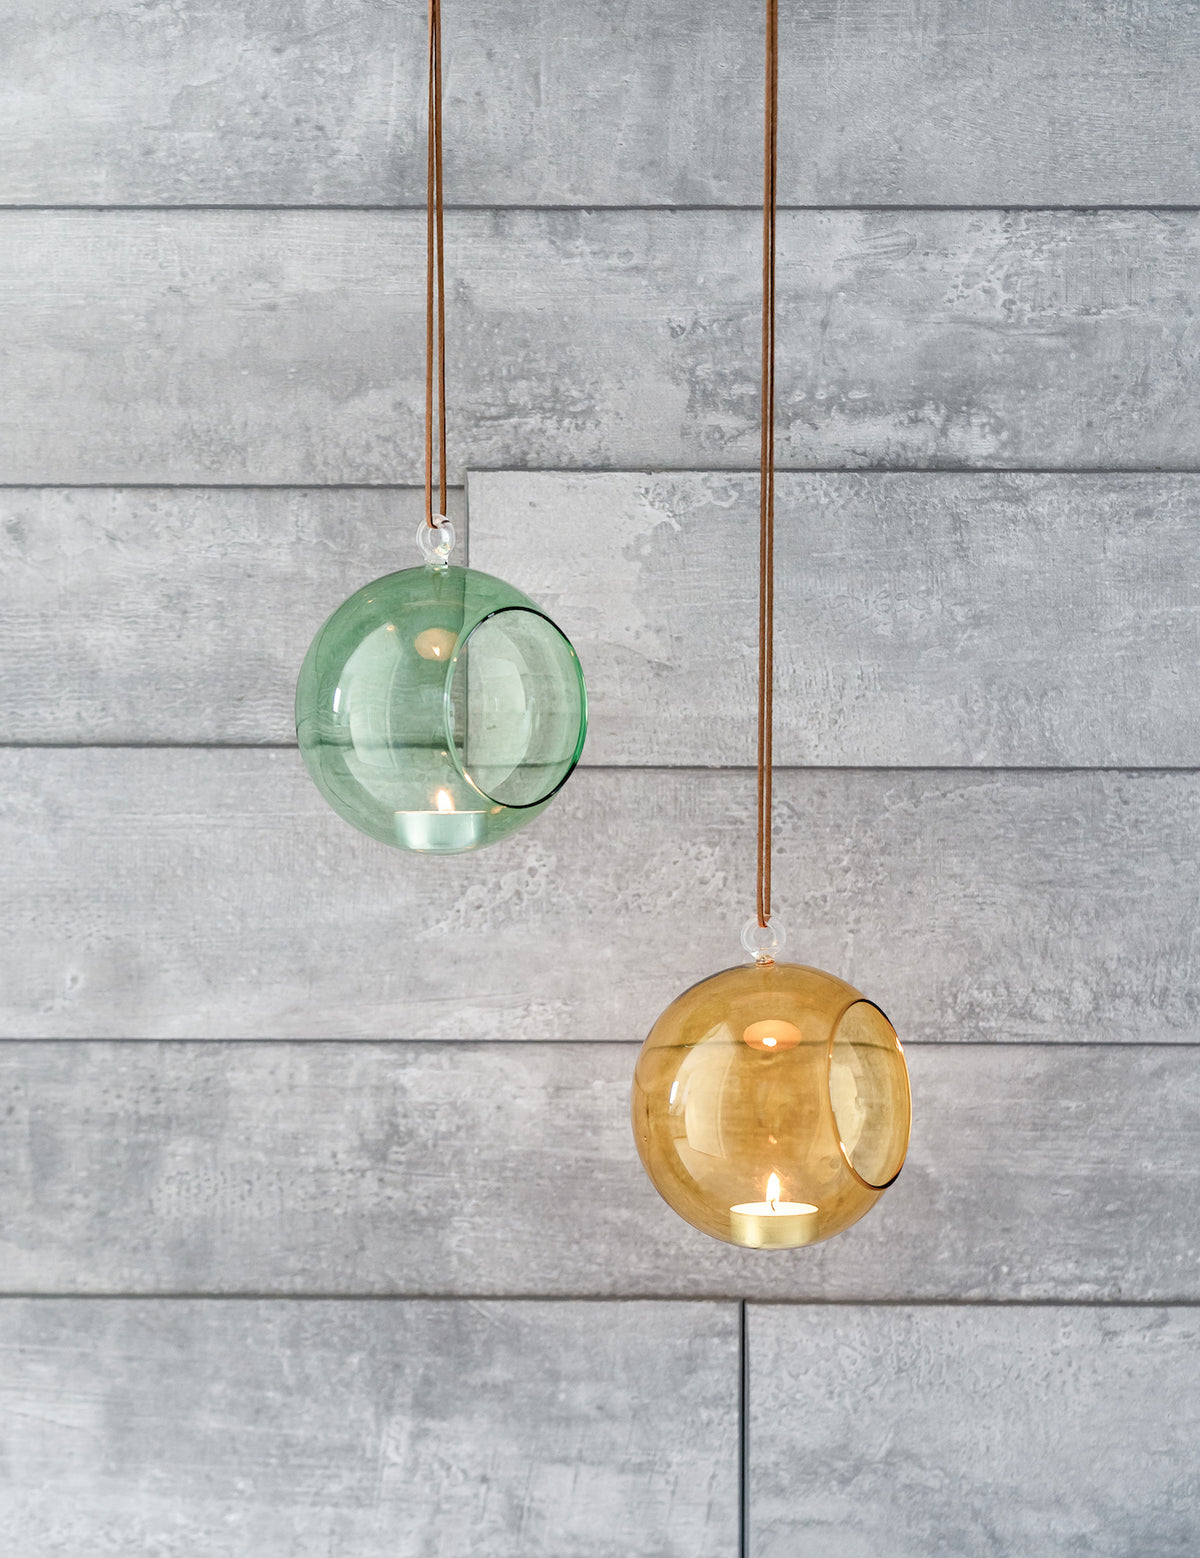 Muurla Decoration Balls 12cm in various colours. For tea-lights, decorations of small plants